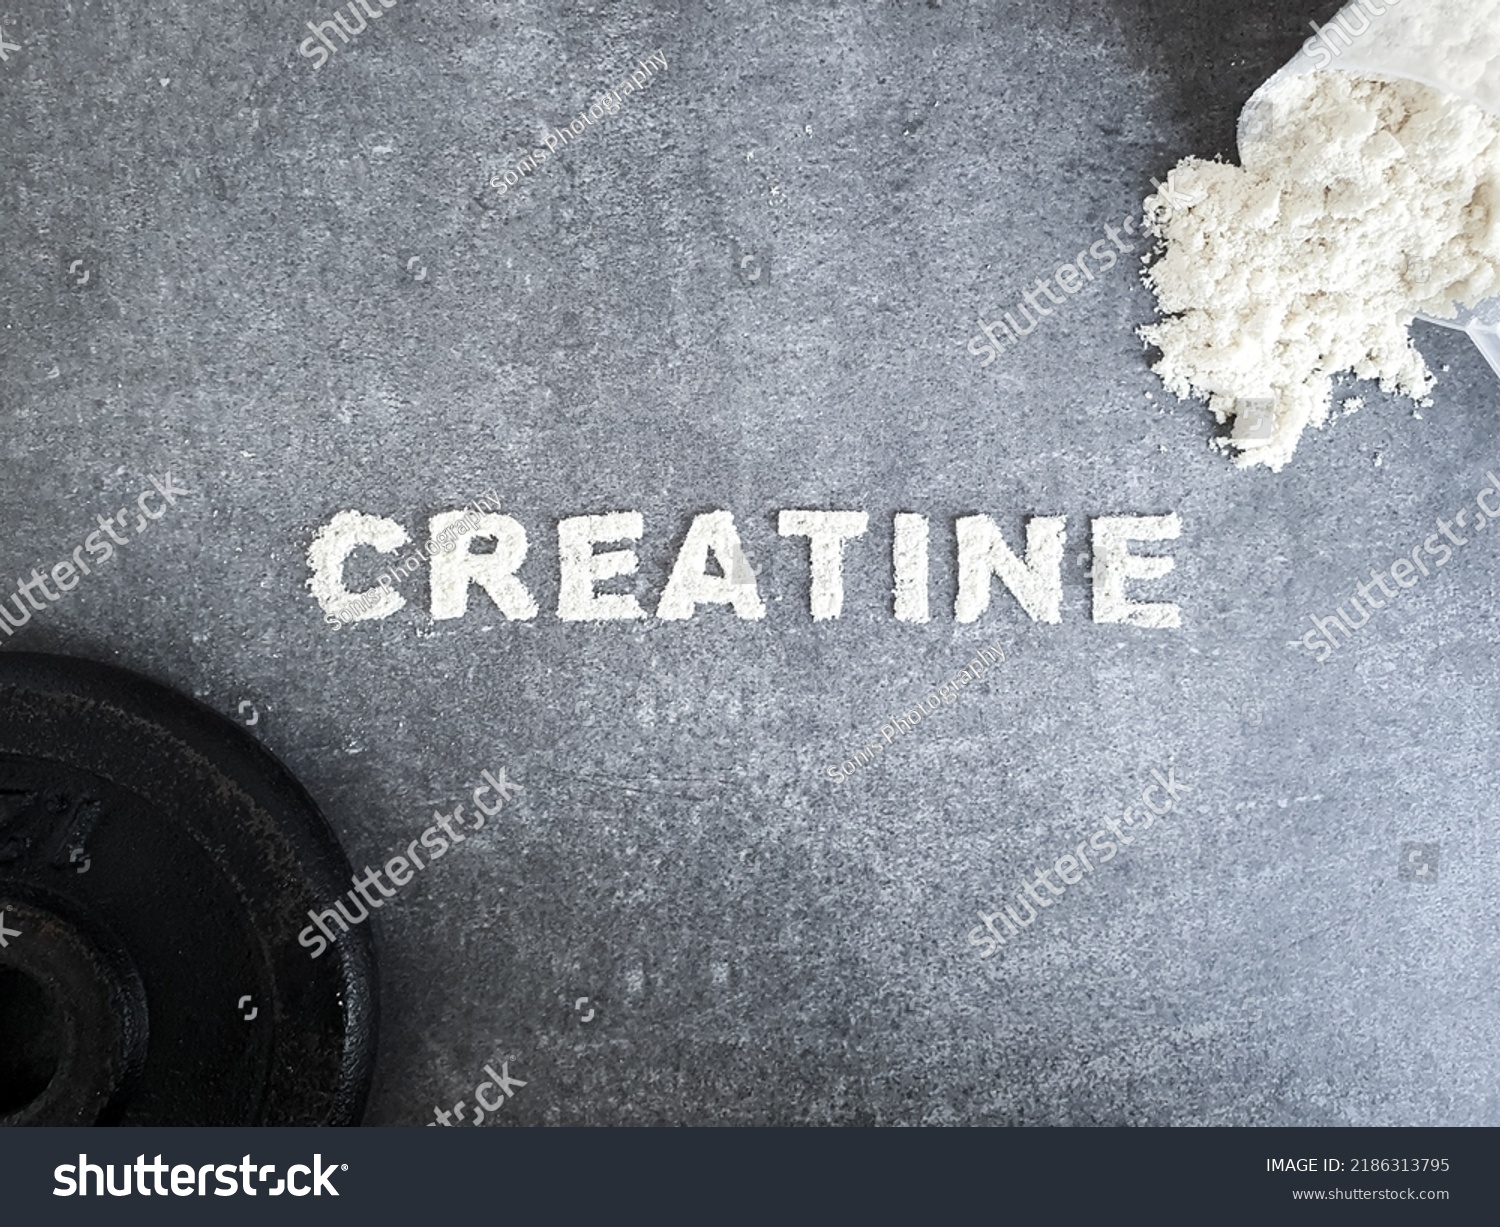 Creatine powder text font for Creatin popular sports supplement used to icrese muscle mass on stone background with scoop of creatine powder and sumbbell concept #2186313795